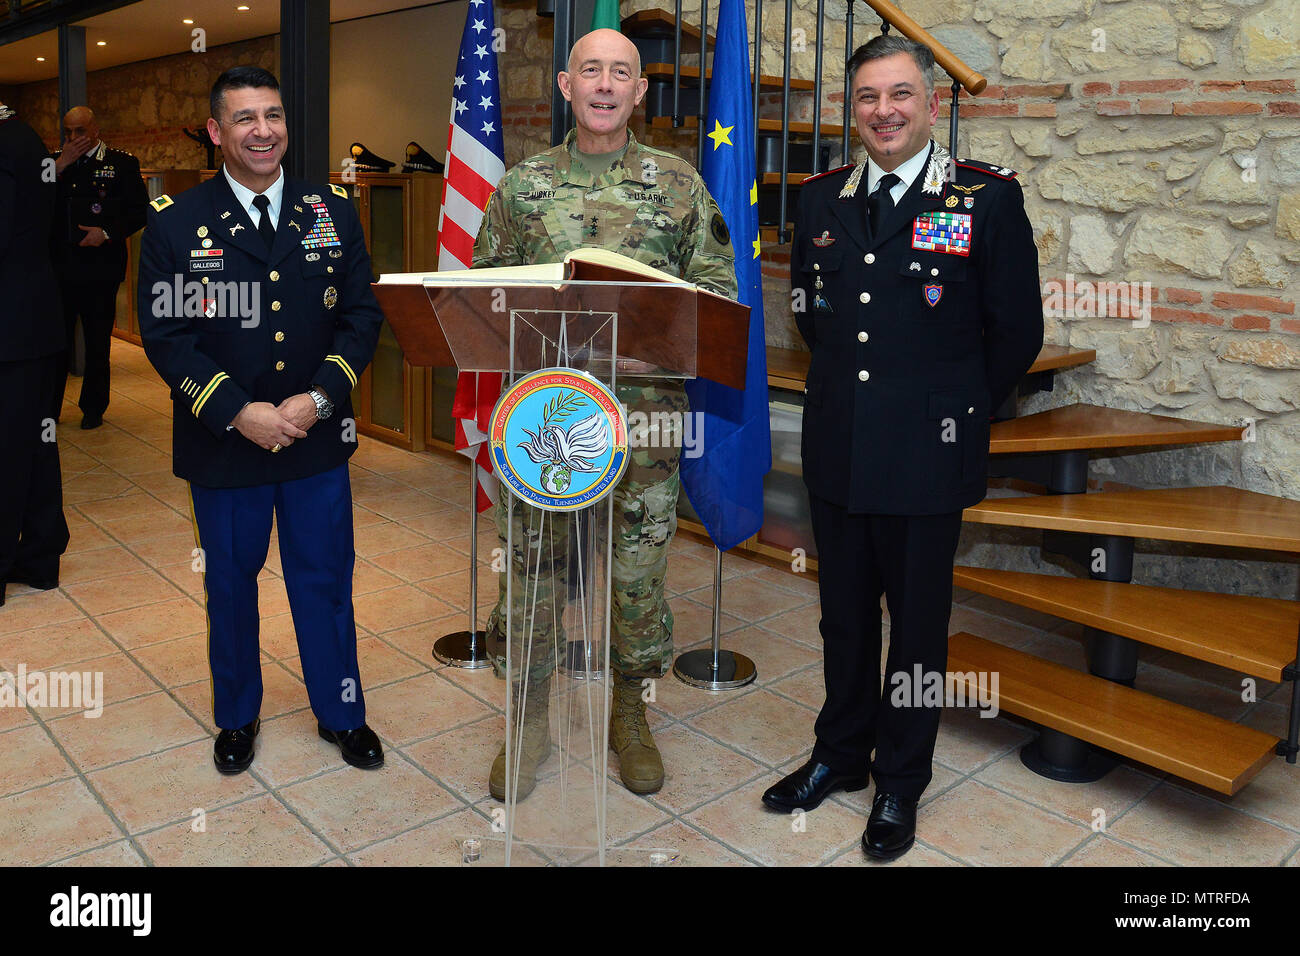 U.S. Army Col. Darius S. Gallegos (left), Center of Excellence for Stability Police Units (CoESPU) deputy director, Lt. Gen. Charles D. Luckey (center), Commanding General U.S. Army Reserve Command, Brig. Gen. Giovanni Pietro Barbano( right), (CoESPU) director, during visit at Center of Excellence for Stability Police Units (CoESPU) Vicenza, Italy, January 20, 2017.(U.S. Army Photo by Visual Information Specialist Paolo Bovo/released) Stock Photo